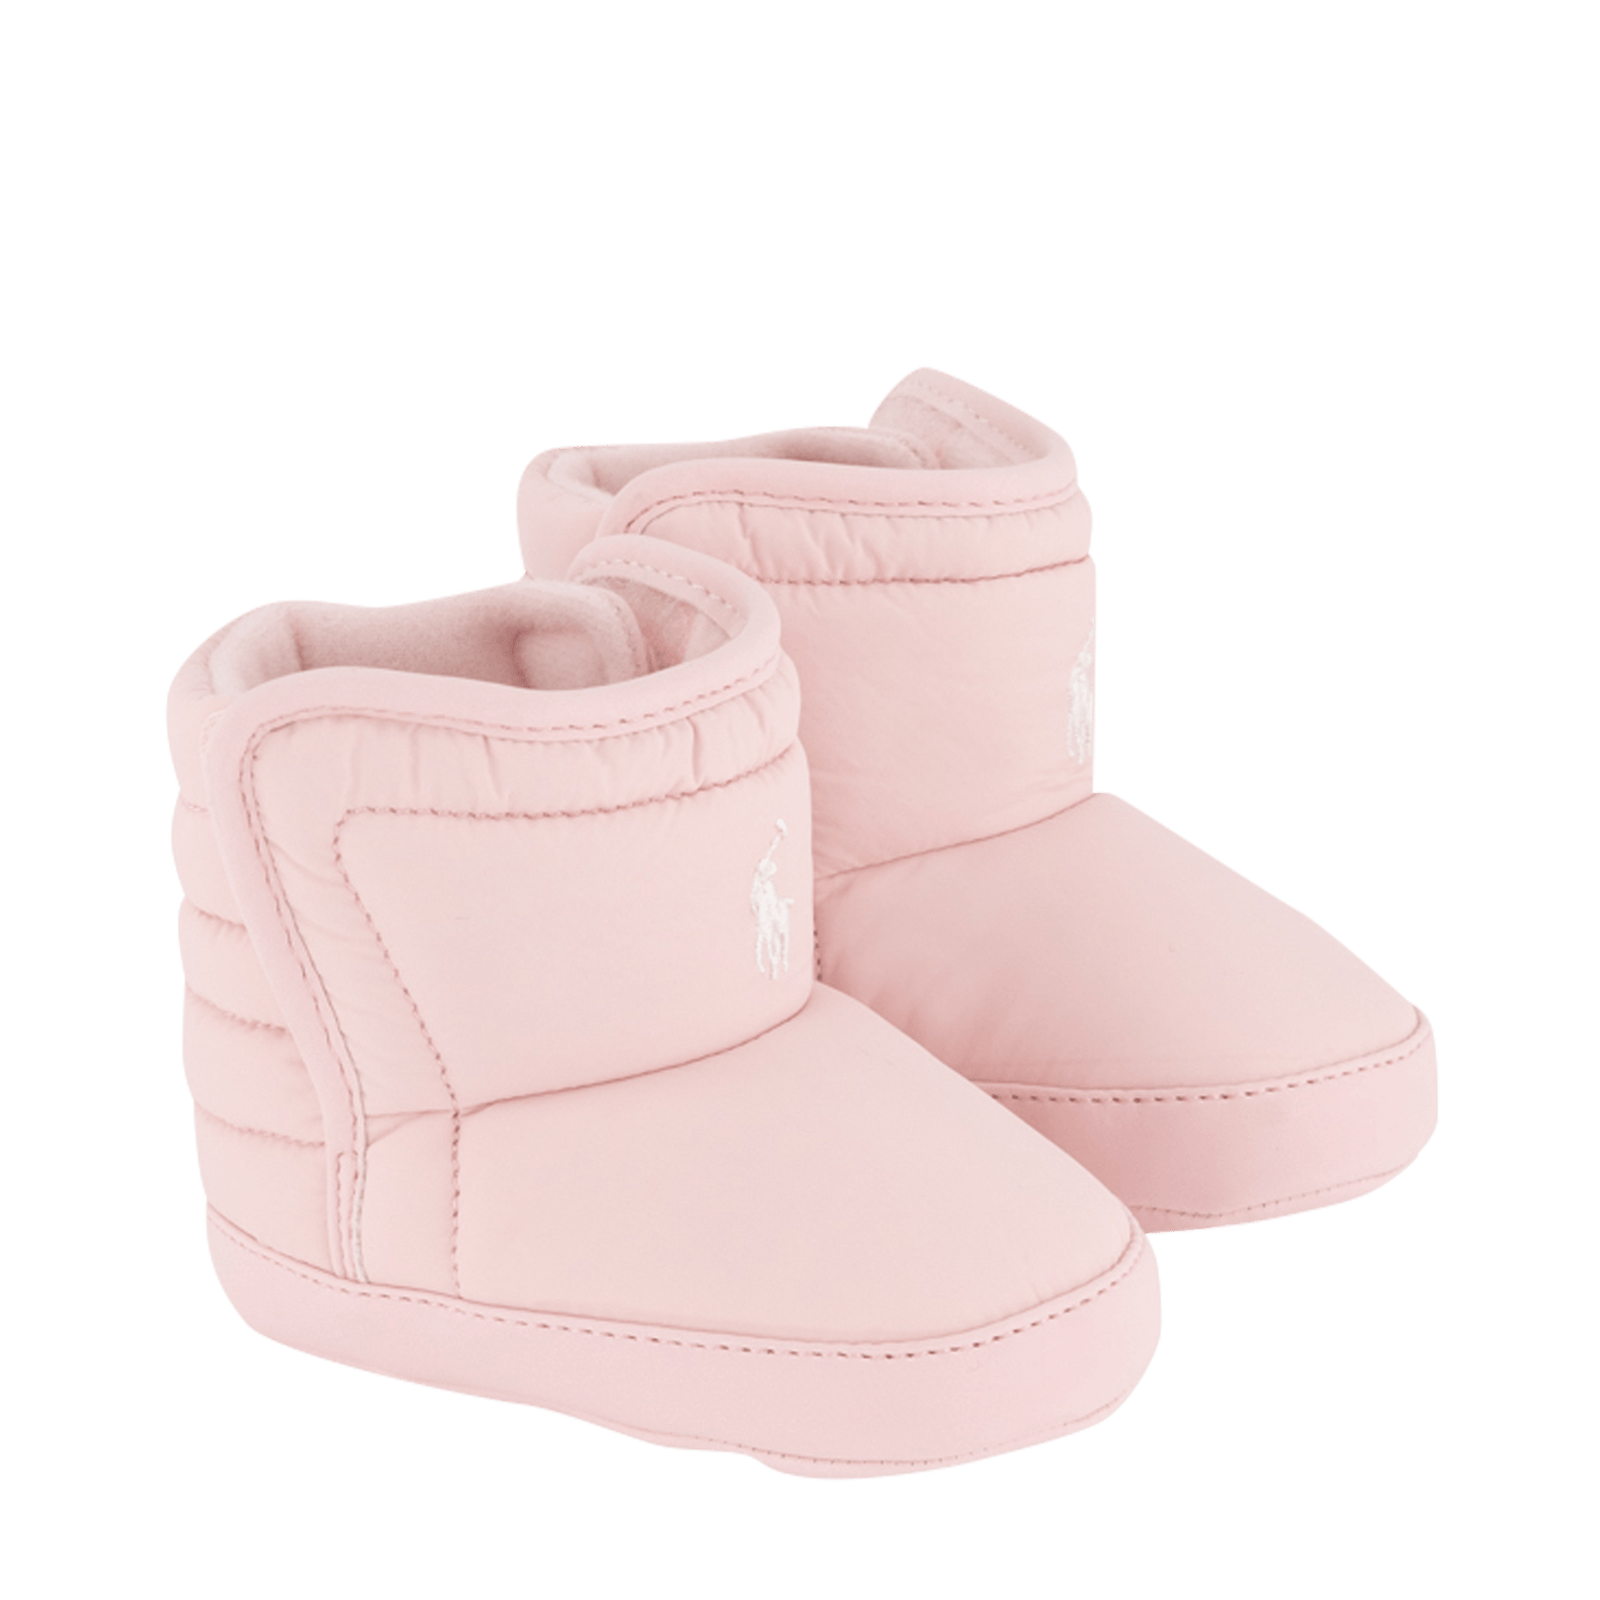 Baby Girls Shoes Light Pink